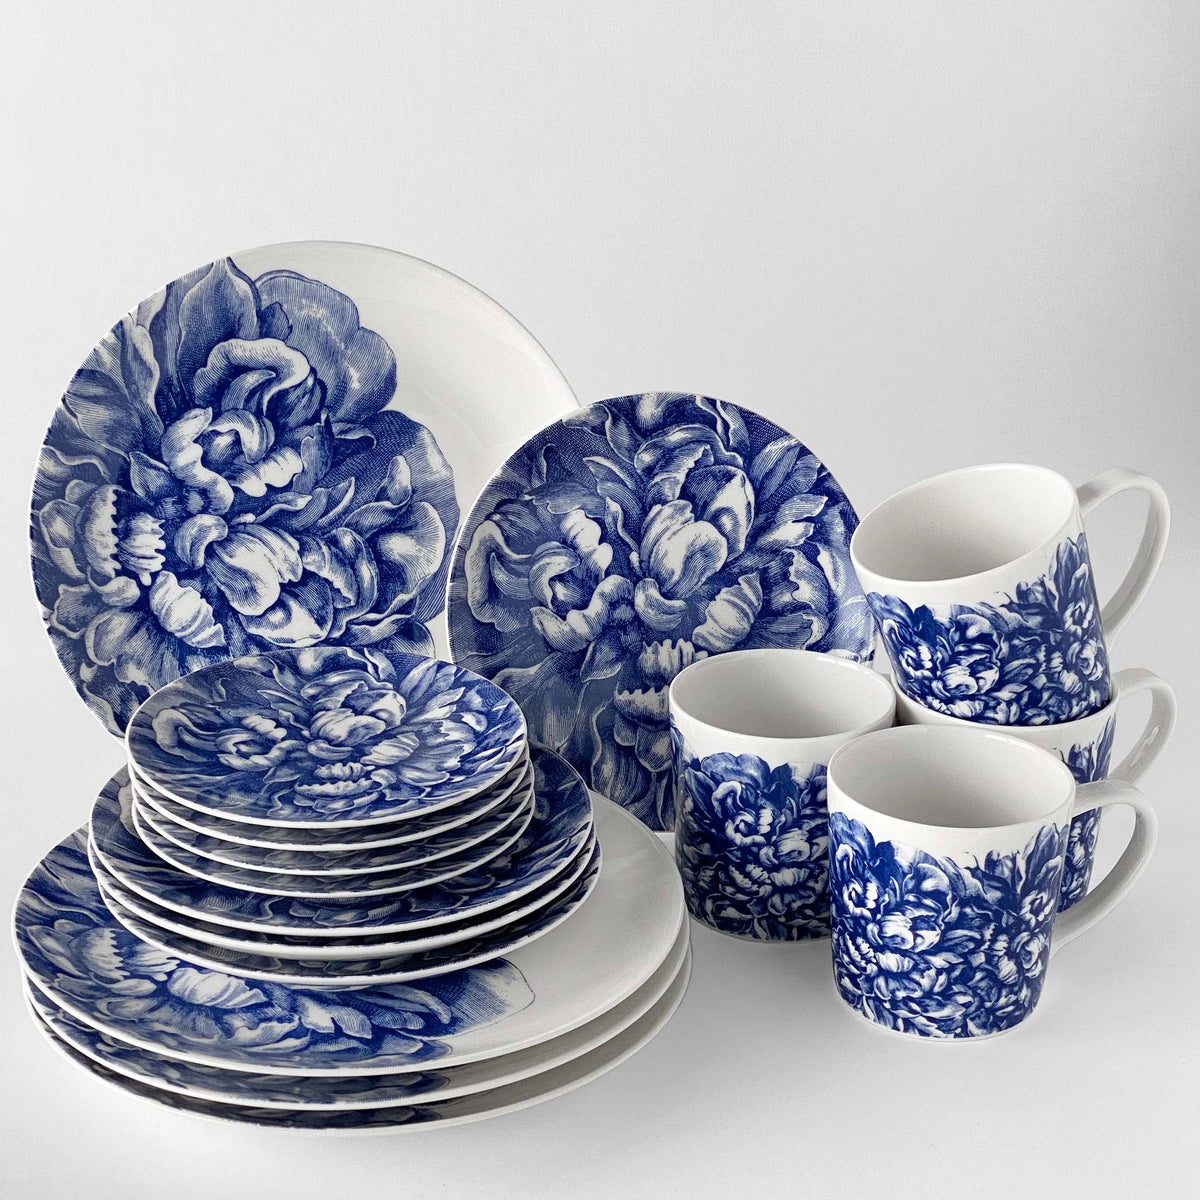 A blue and white porcelain Caskata Artisanal Home dinnerware set with a floral Peony Full Bloom Coupe Salad Plate pattern.